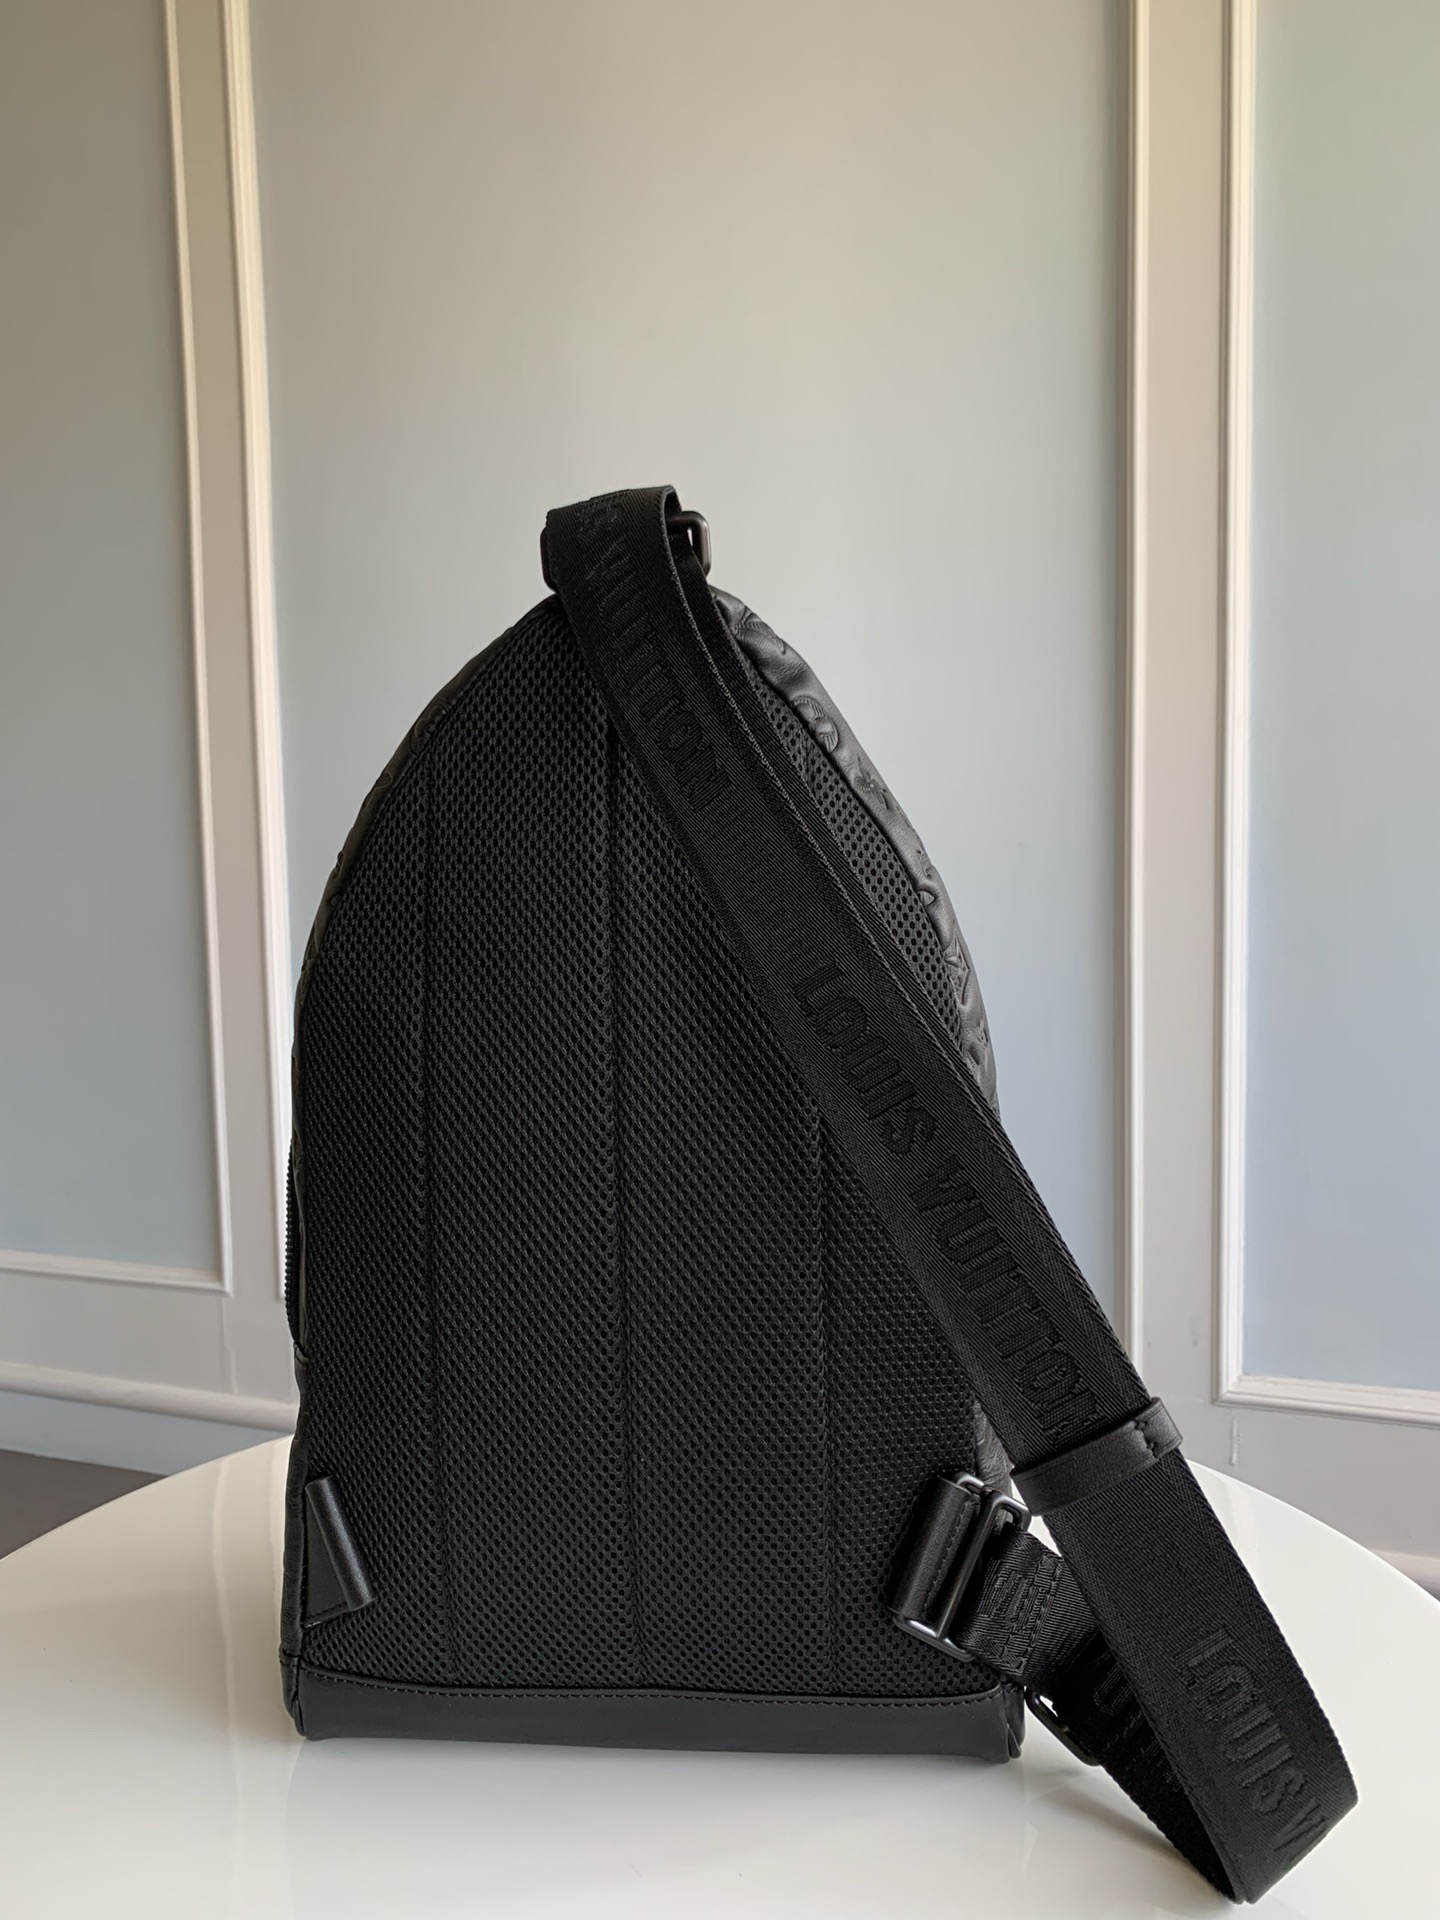 My husband's new Racer Slingbag (M46107). I'm in love with it